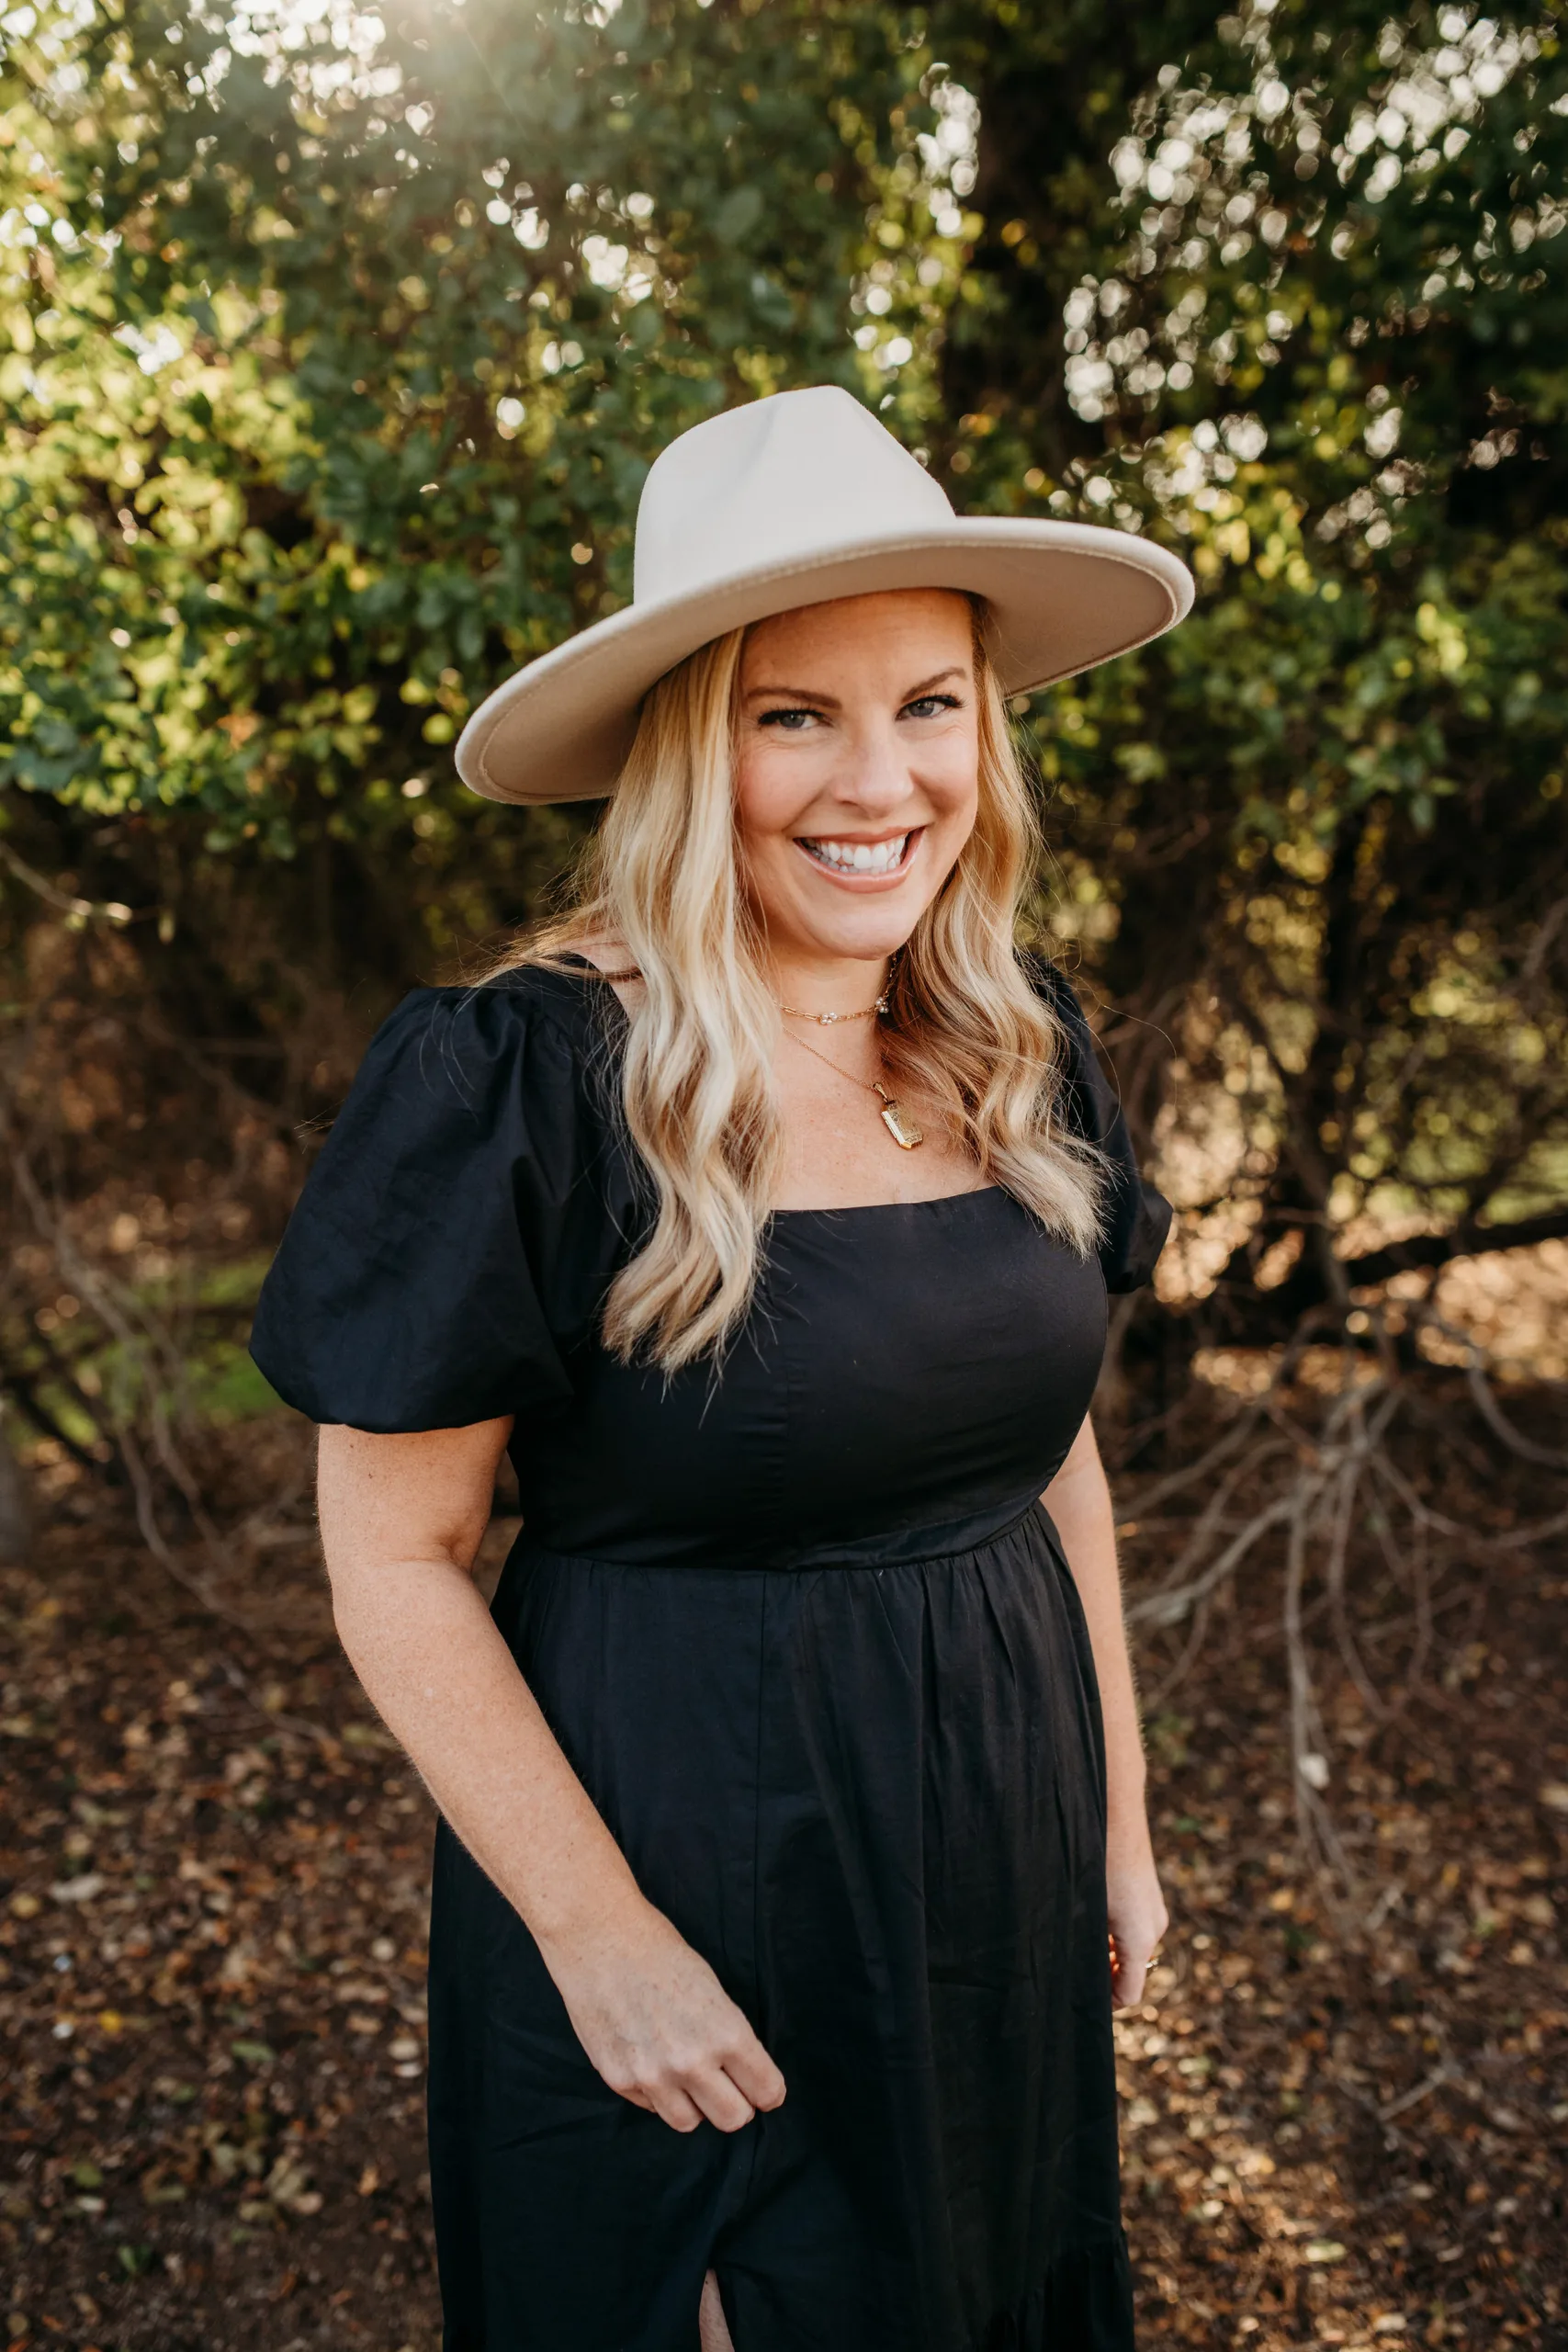 A woman in a black dress and white hat smiles in a sunlit wooded area.